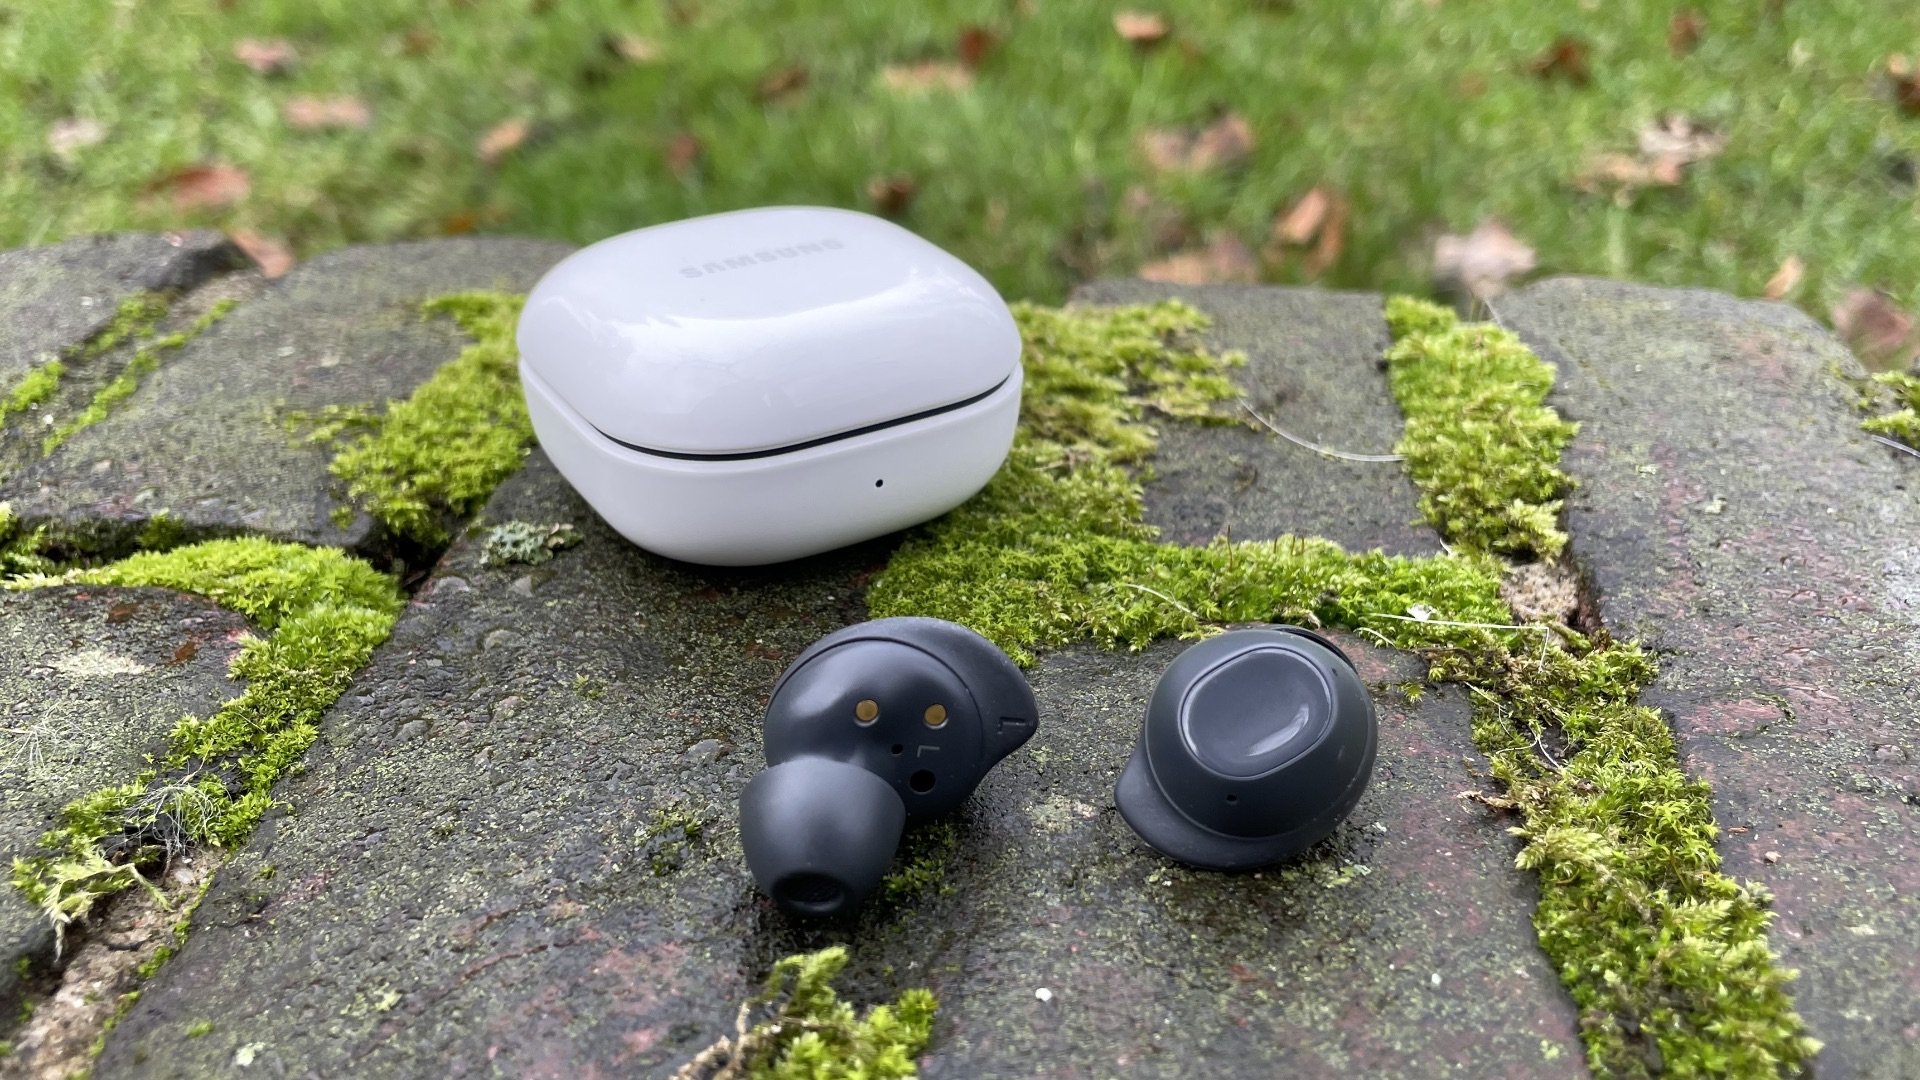 Samsung Galaxy Buds FE Review: The TWS Earbuds I Thought I Wanted